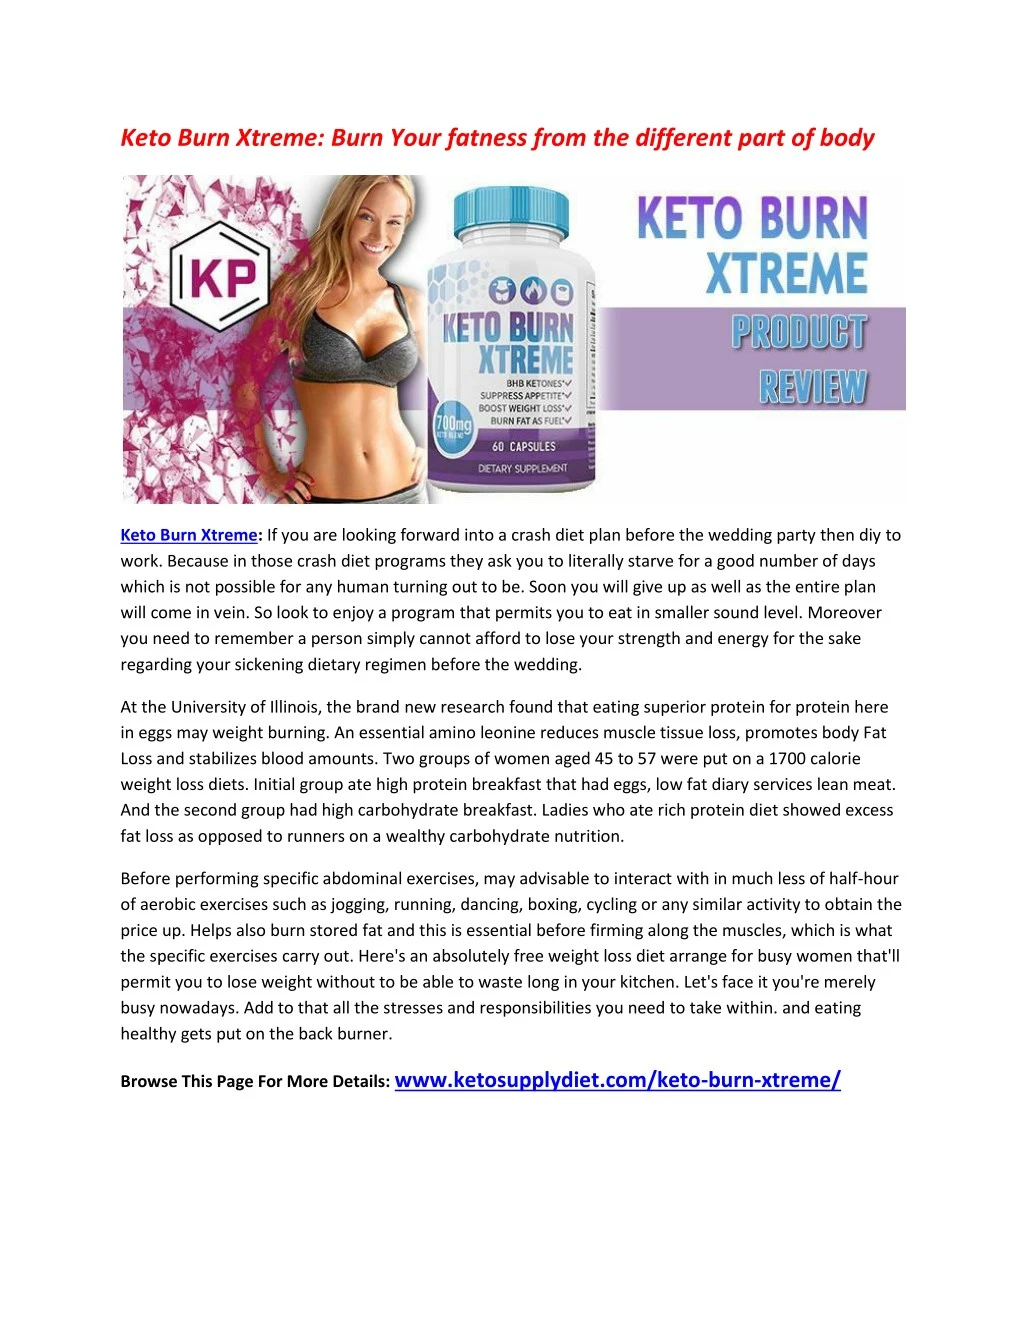 keto burn xtreme burn your fatness from